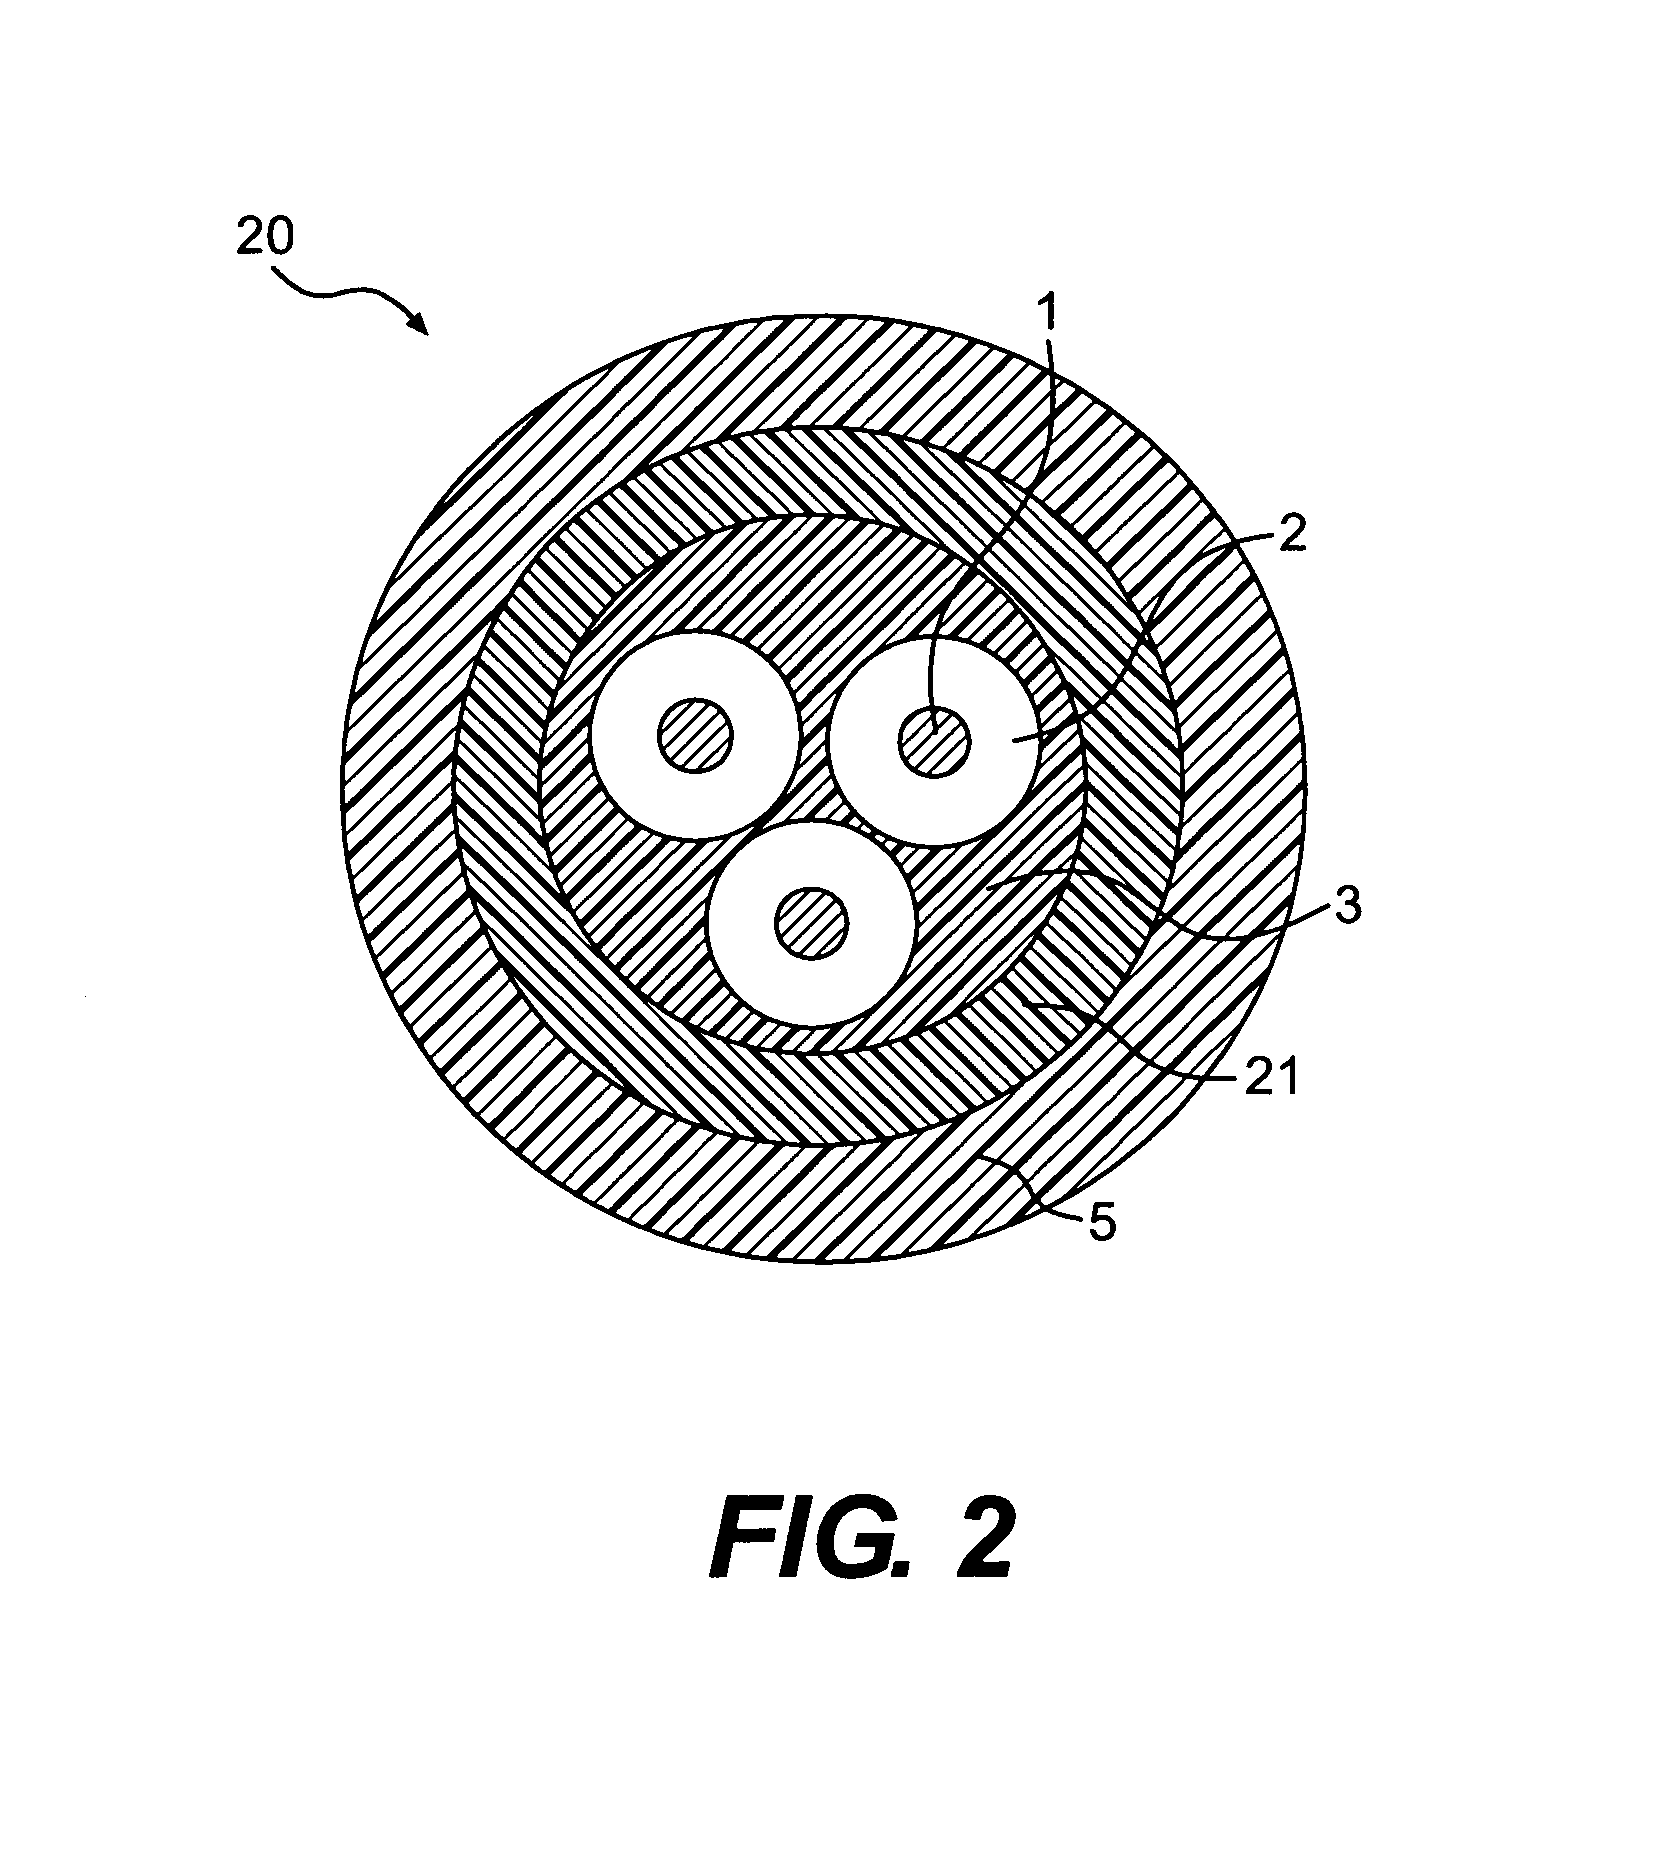 Impact-resistant self-extinguishing cable